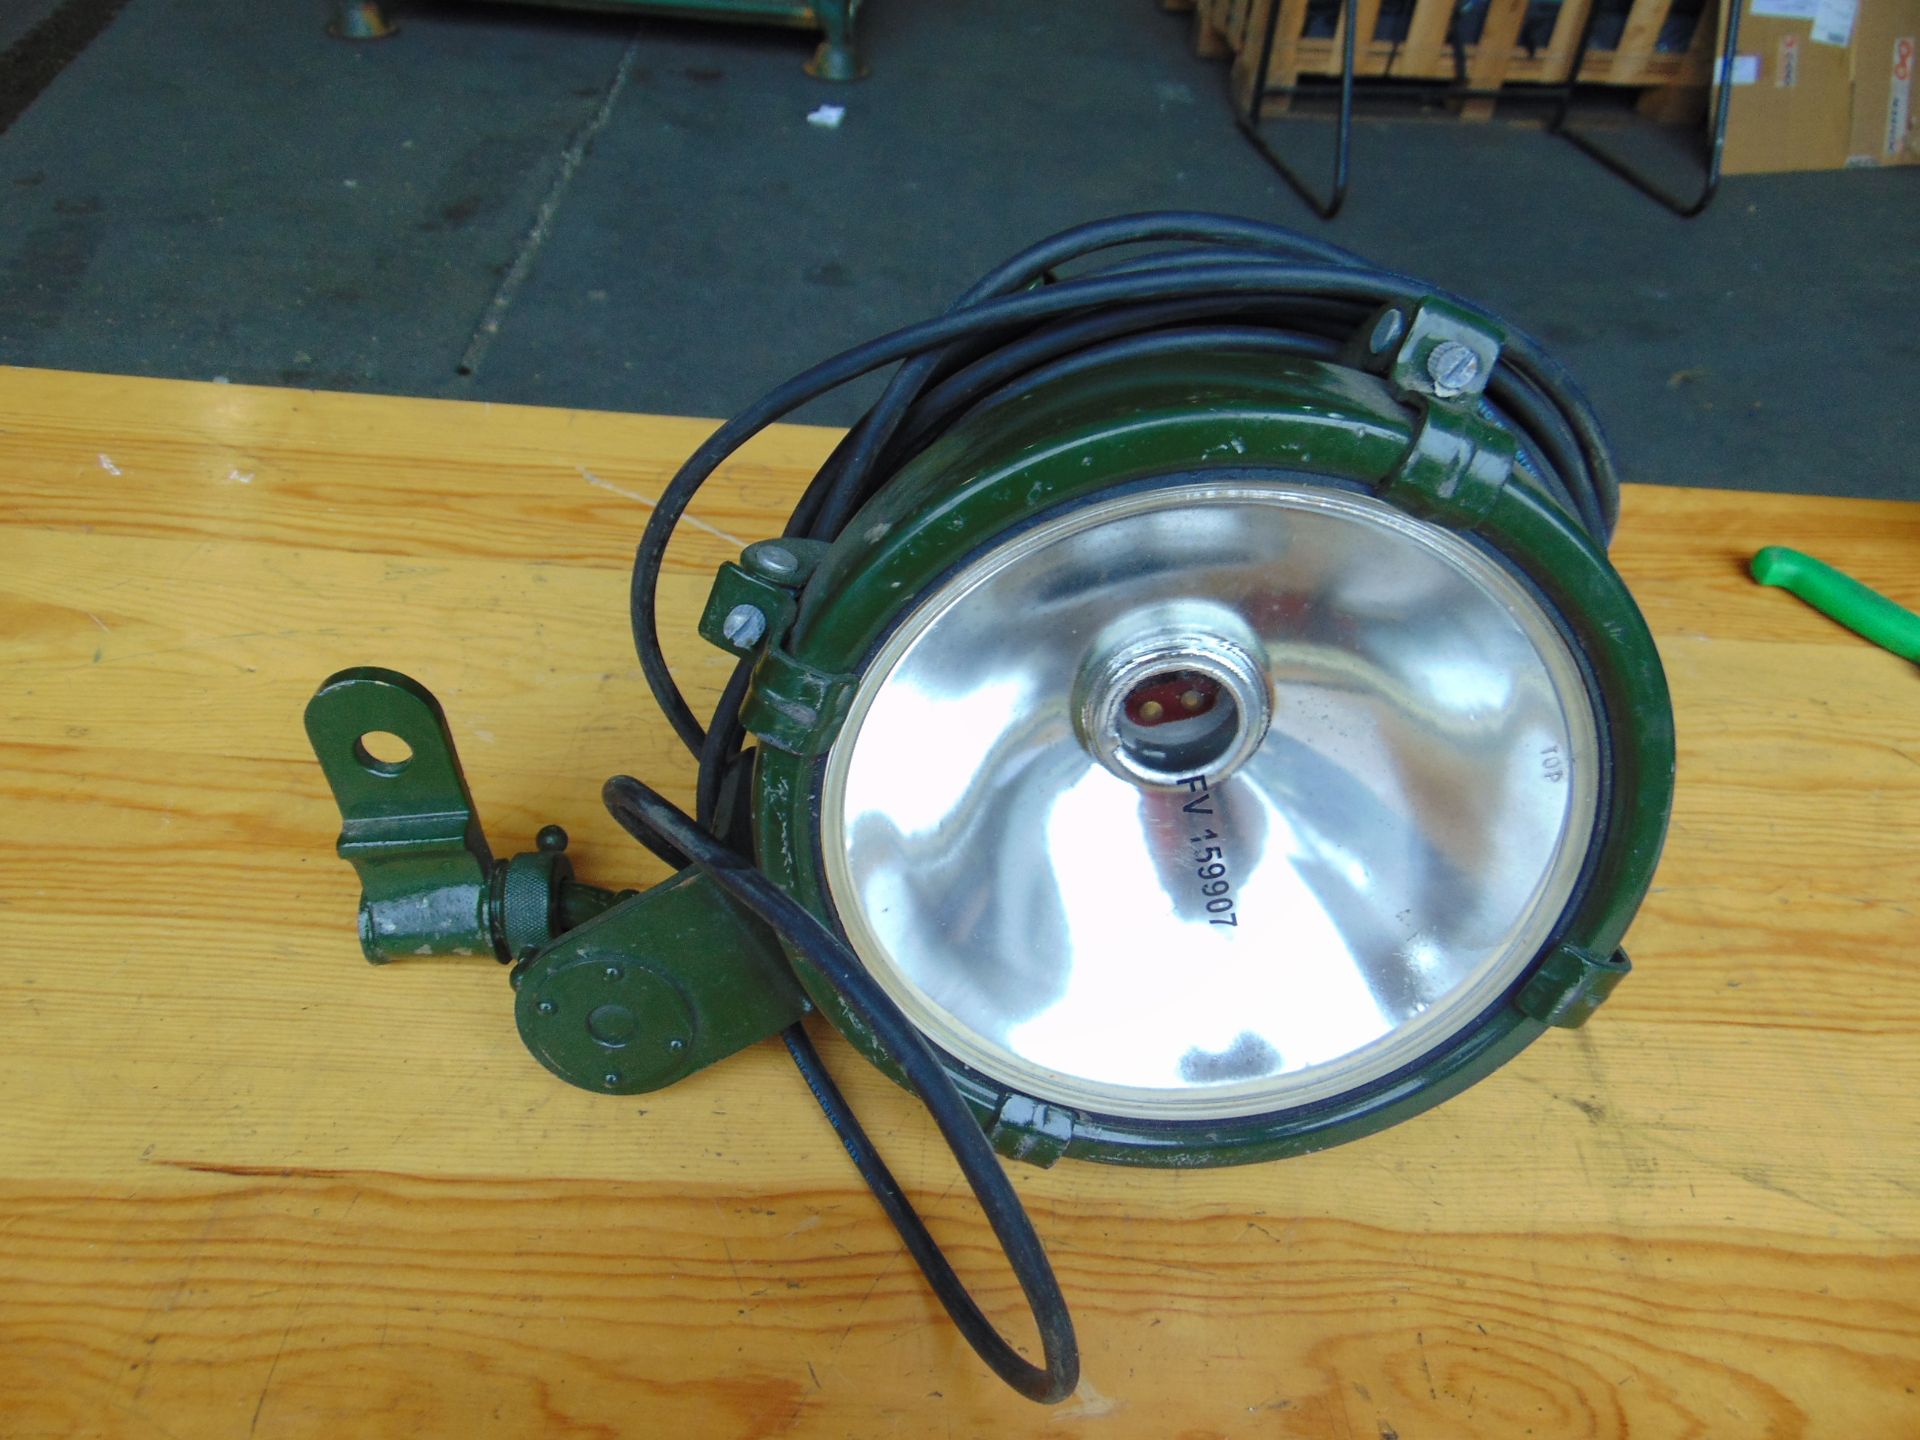 Unissued FV Search Light c/w Bracket, Cable and Plug